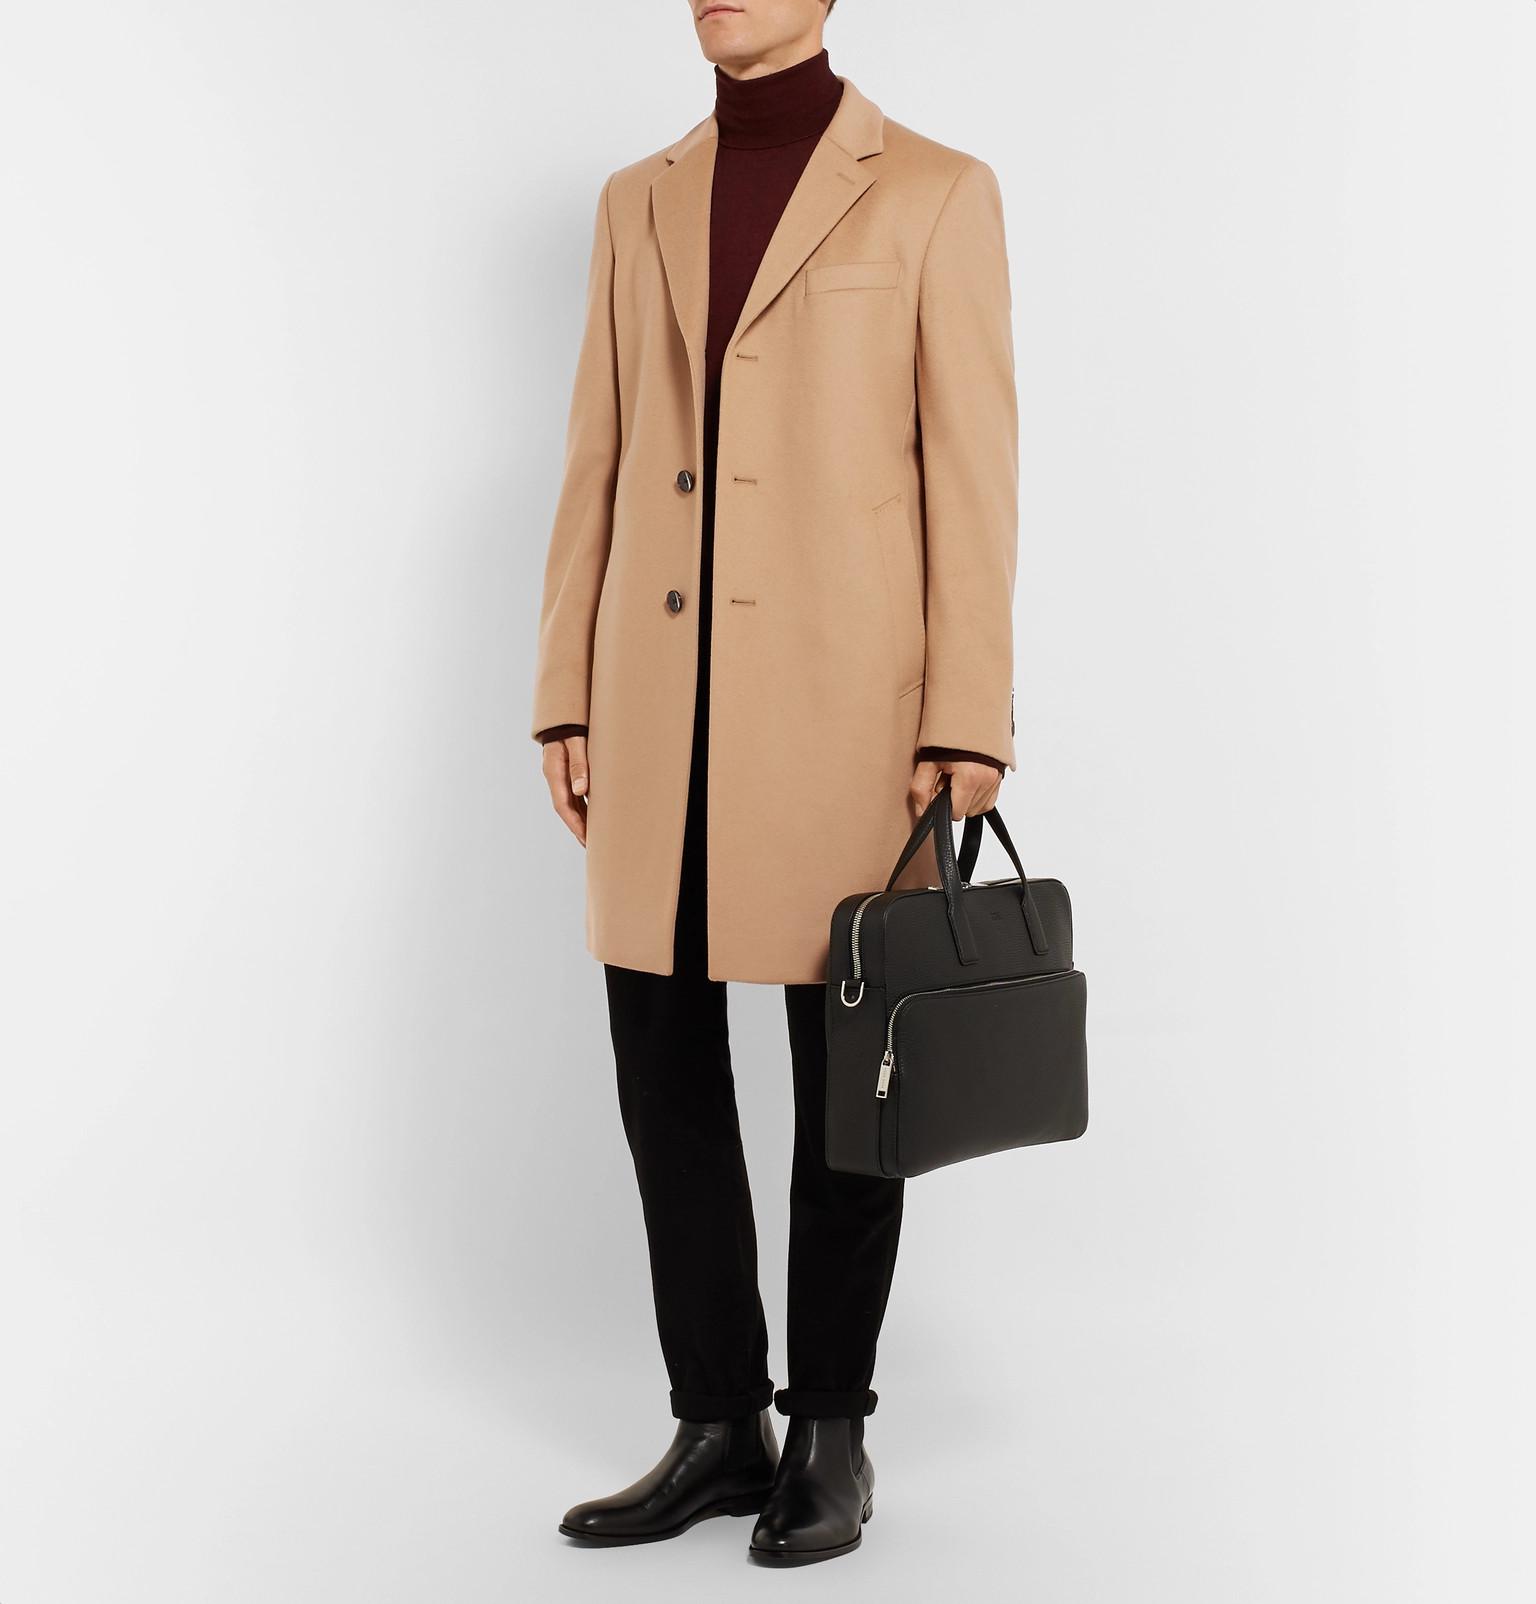 BOSS Virgin Wool And Cashmere-blend Coat in Camel (Natural) for Men - Lyst